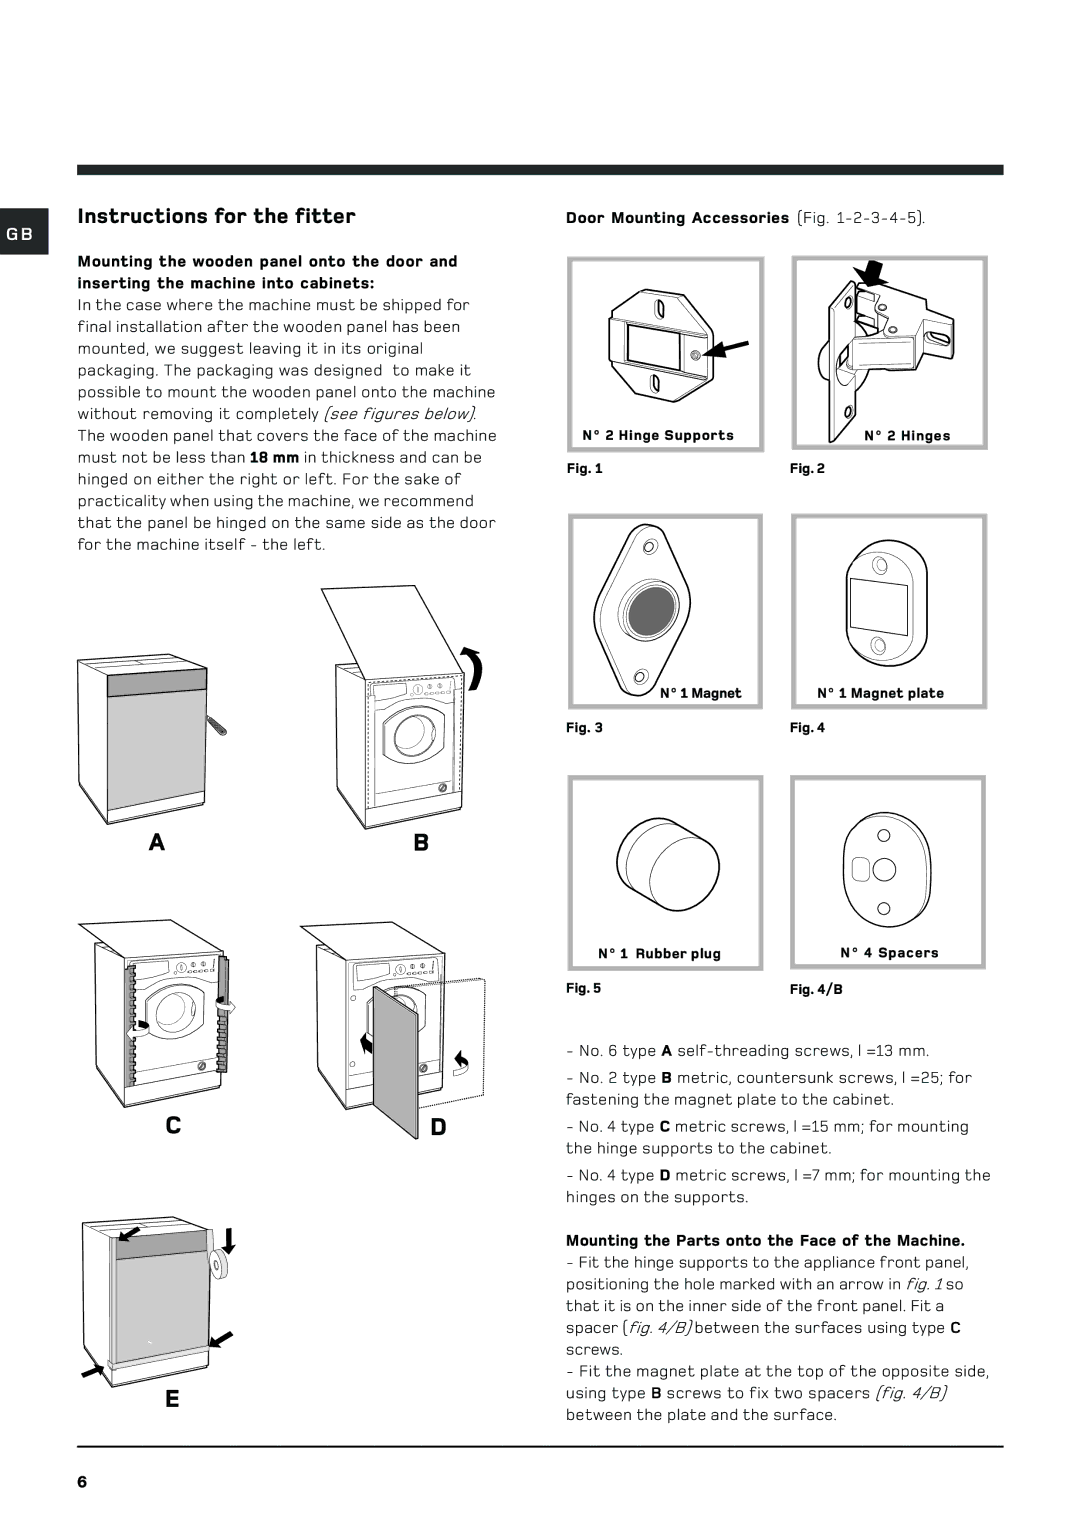 Xerox BHWM 129 manual Instructions for the fitter 